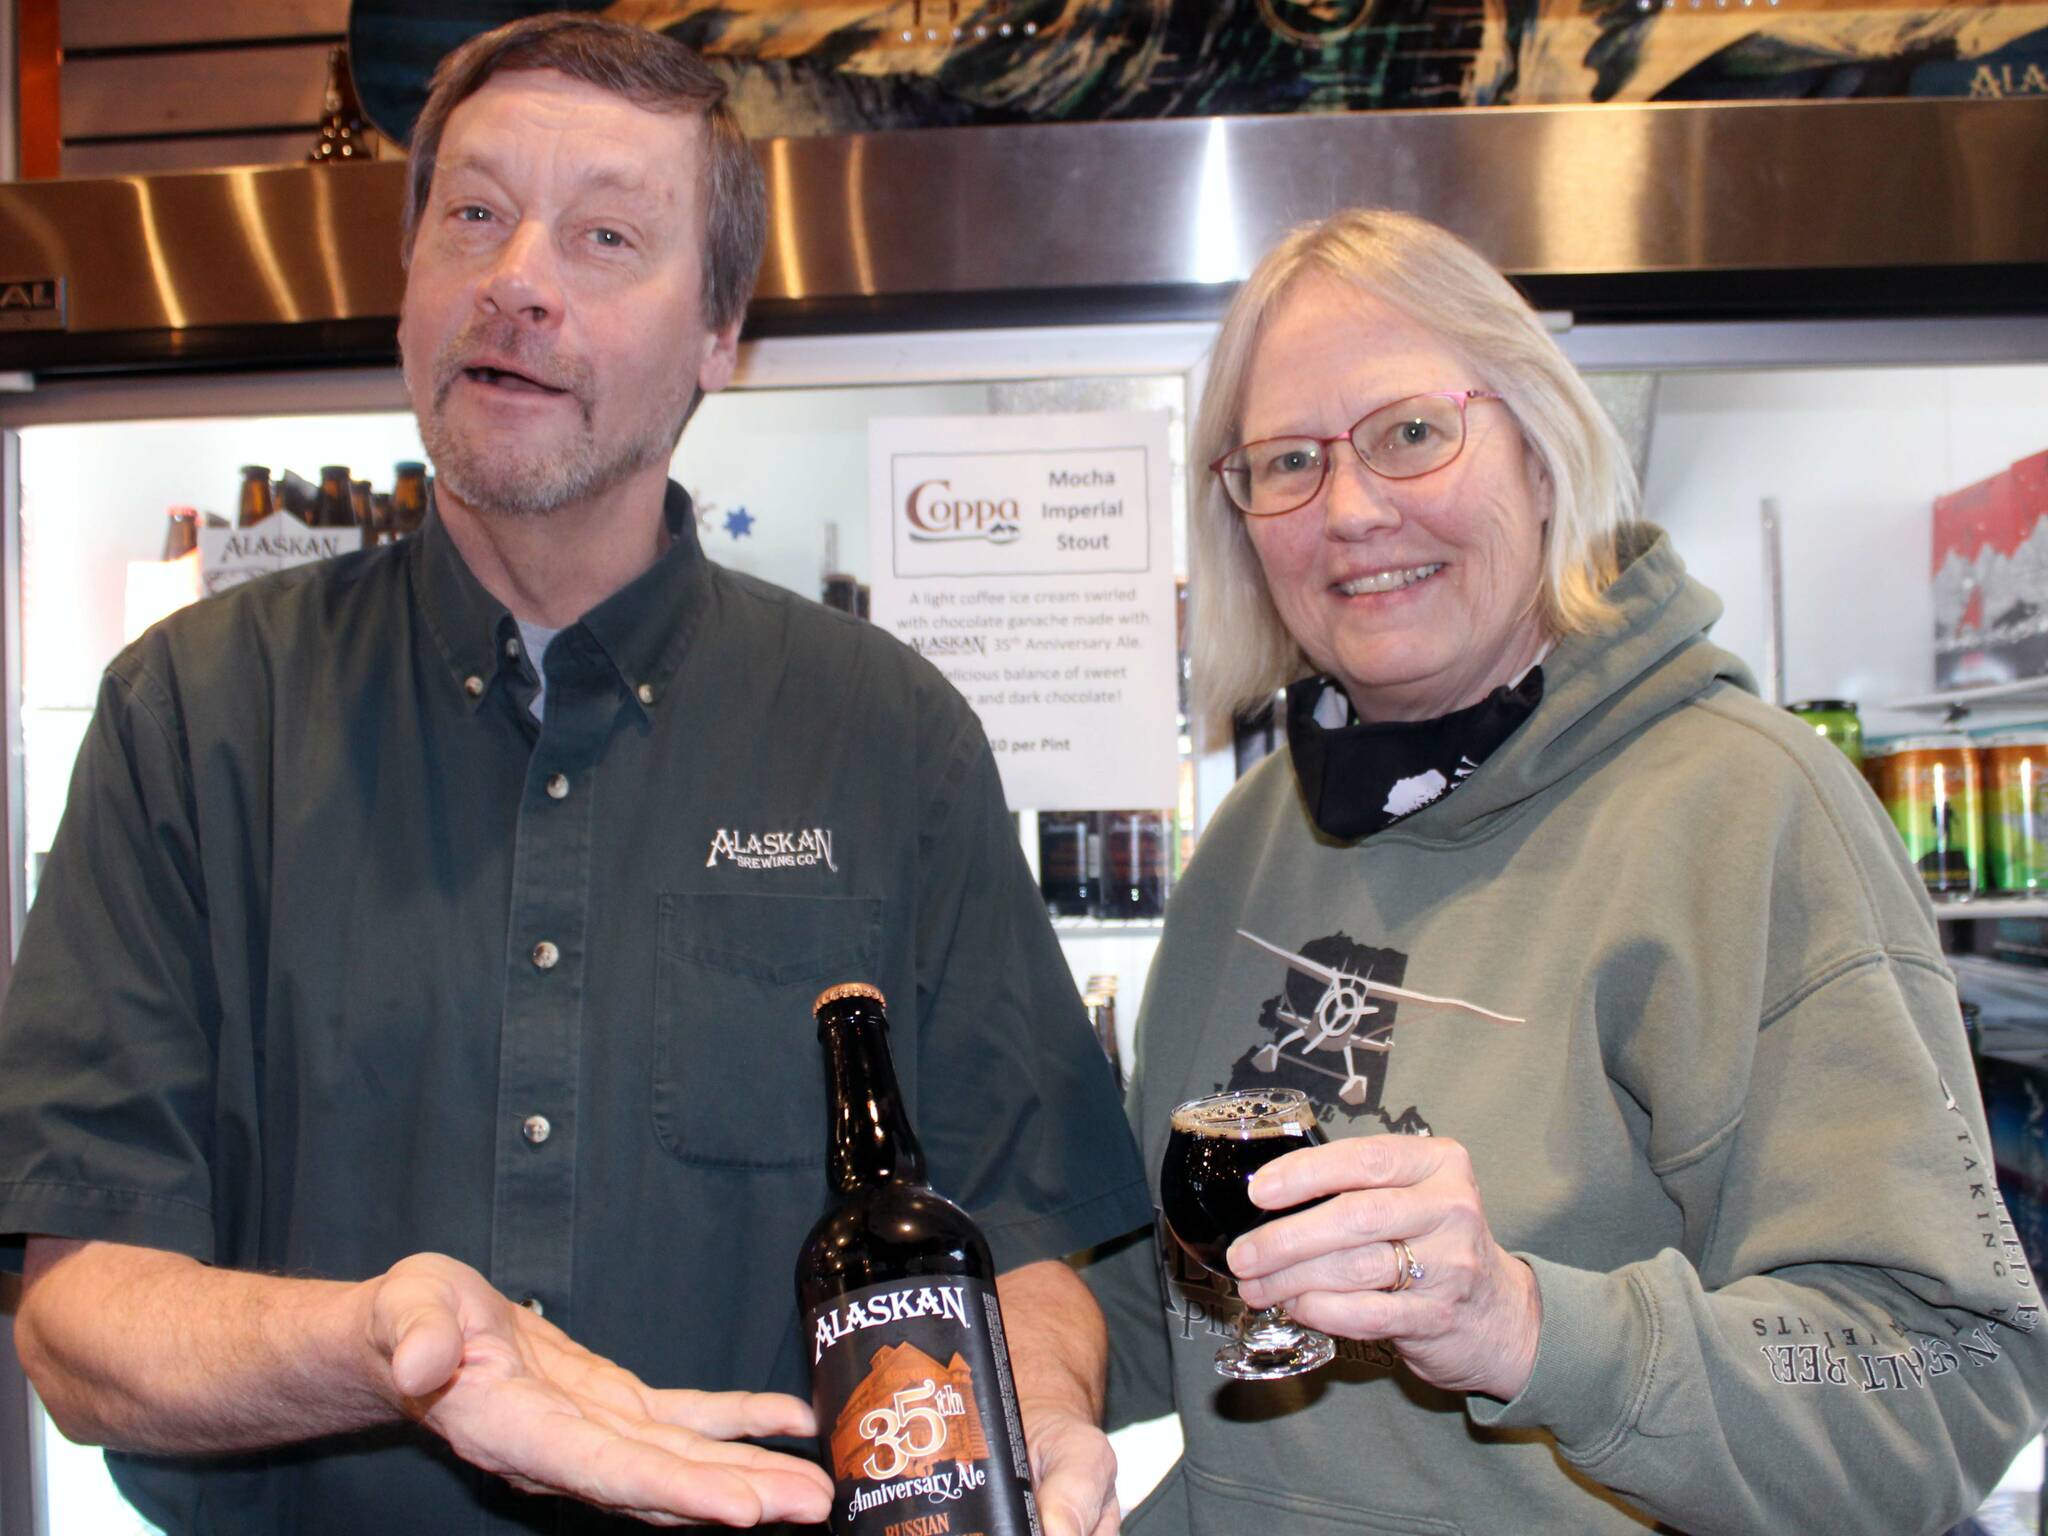 Geoff and Marcy Larson show off a special beer being brewed to celebrate the brewery’s 35th anniversary on Feb. 4. (Dana Zigmund / Juneau Empire)